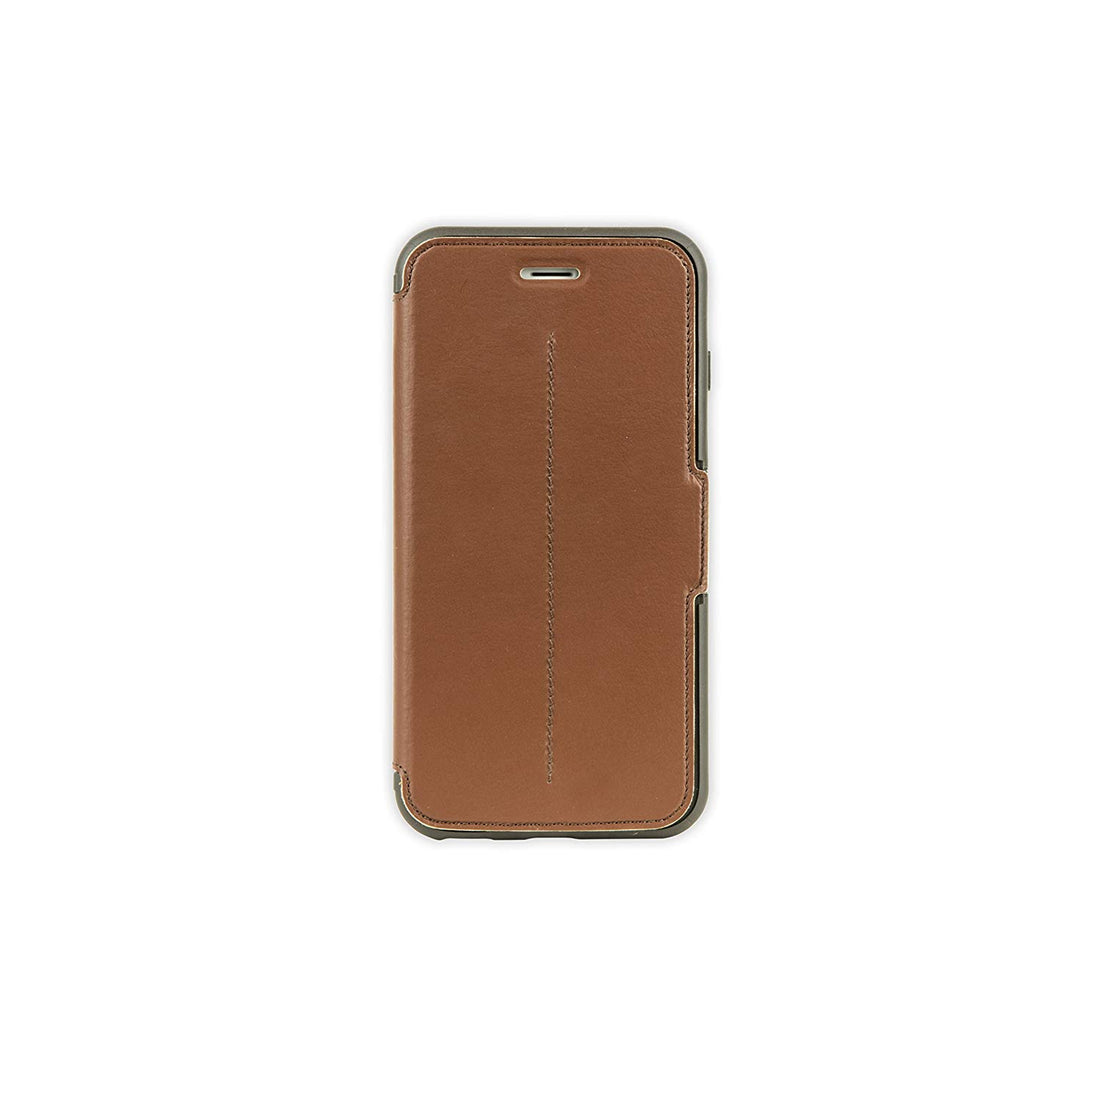 OtterBox STRADA SERIES Leather Wallet Case for Apple iPhone 6 Plus/6S Plus - Saddle (New)